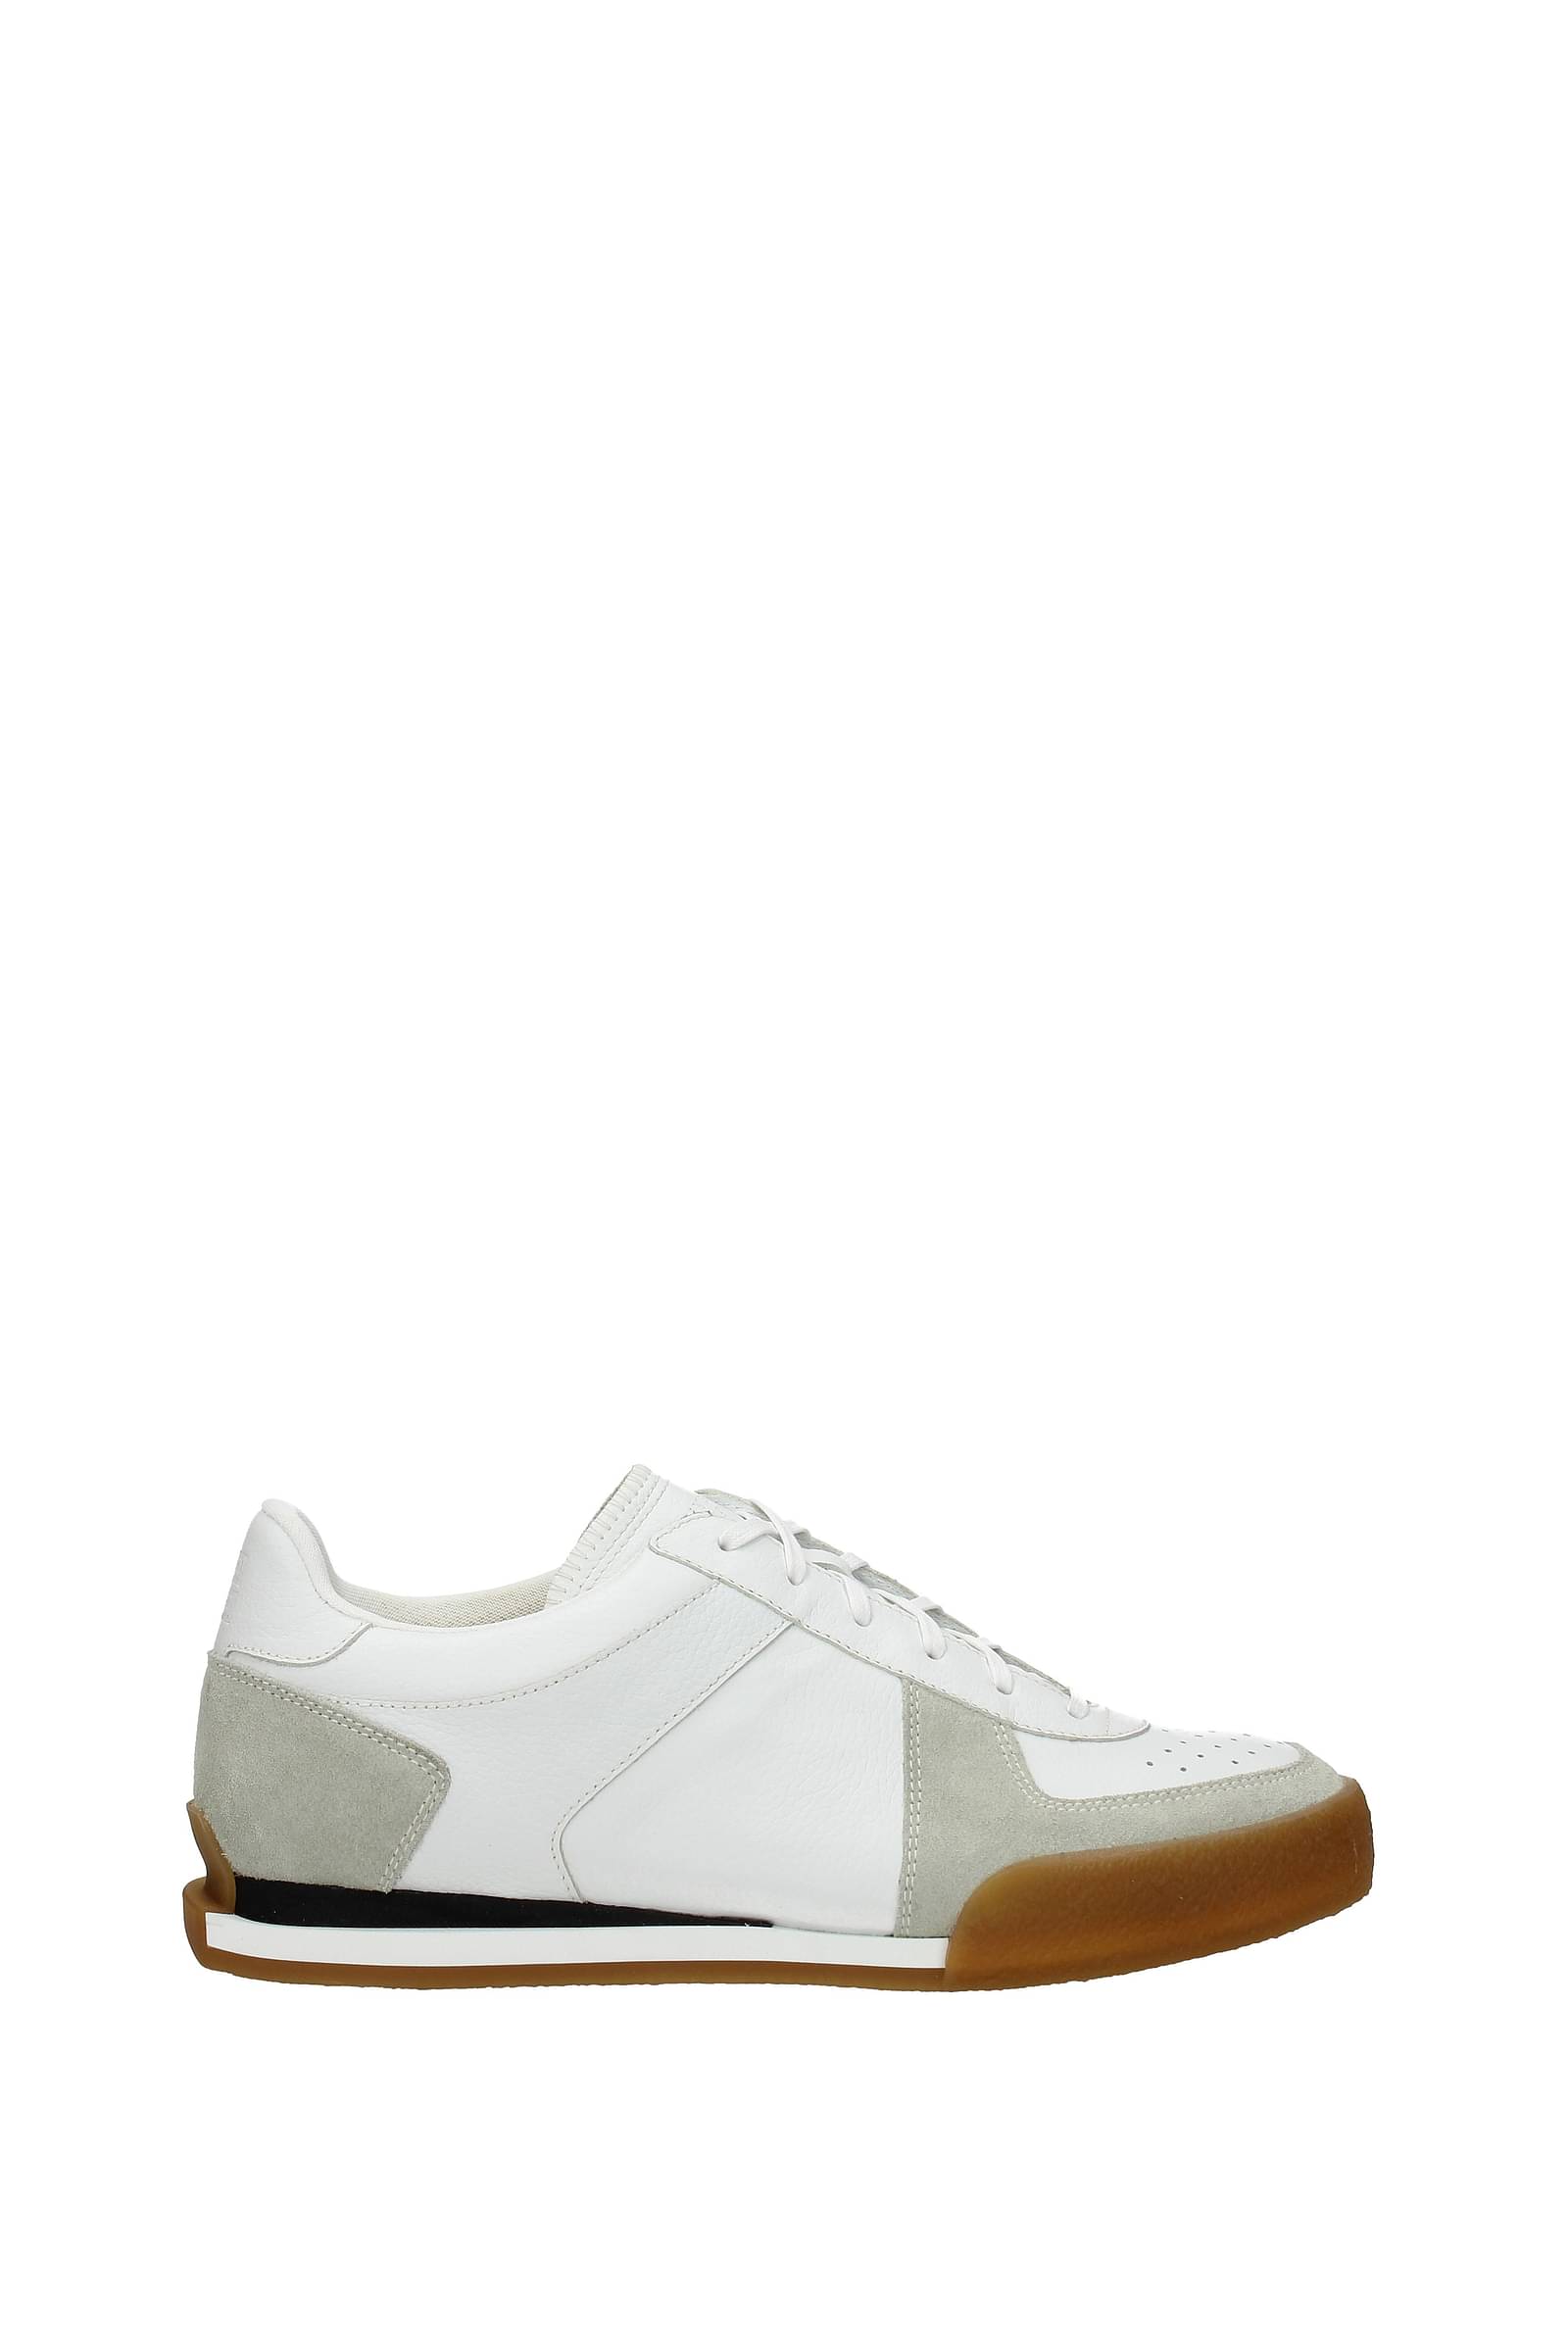 Givenchy | City sport white leather sneakers | Savannahs